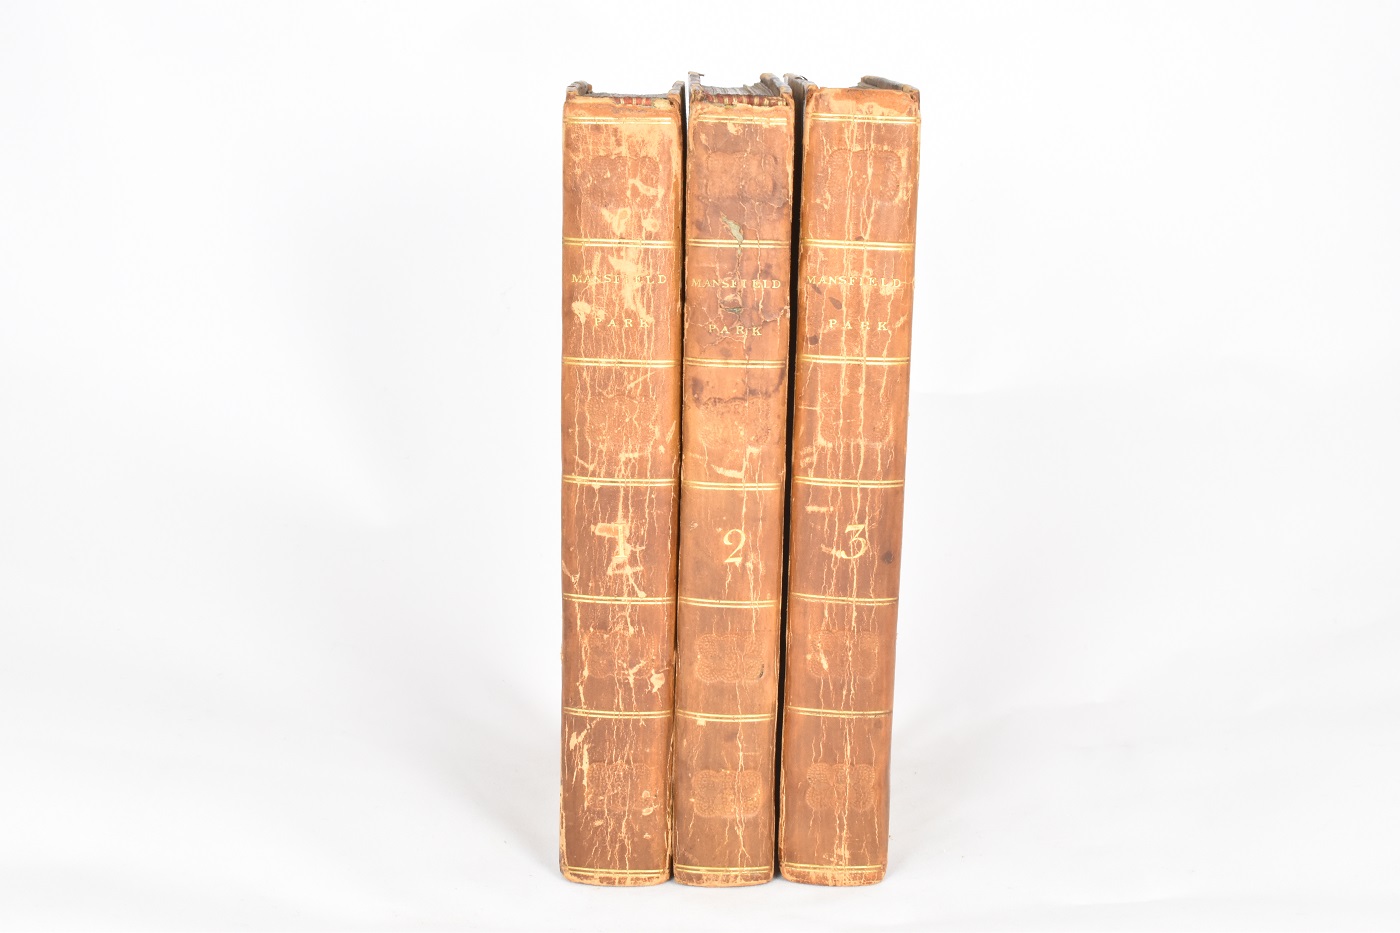 First edition of Mansfield Park published in May 1814. A three volume set.